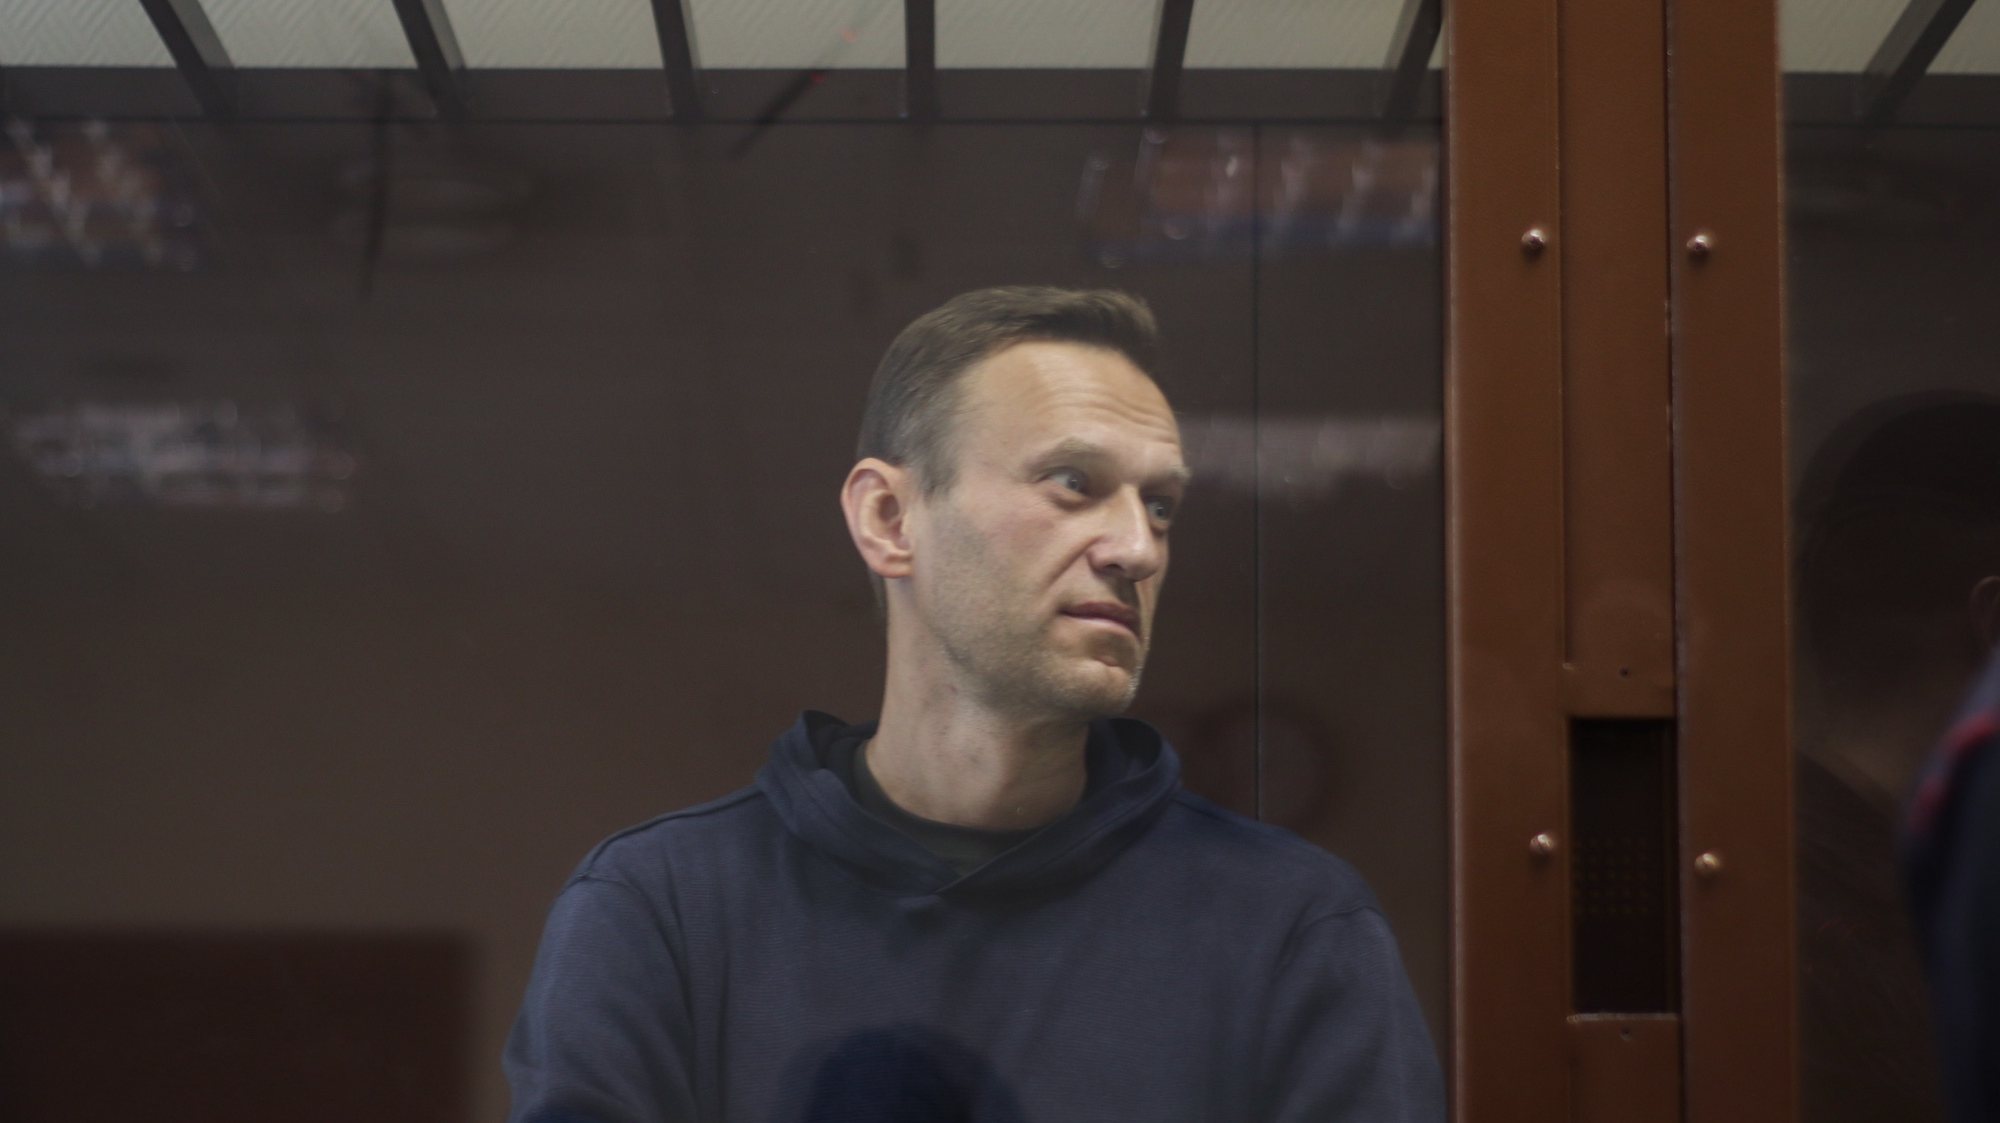 epa08988498 A handout photo made available by the Press Service of the Babushkinsky district court shows Russian opposition leader Alexei Navalny during a hearing of a case on slander charges in Moscow, Russia, 05 February 2021. In June 2020 the Russian Investigative Committee opened a criminal case against Alexei Navalny on charges of slander against WWII veteran Ignat Artemenko after Navalny’s comment about a video promoting the amendments to the Russian Constitution.  EPA/BABUSHKINSKY DISTRICT COURT PRESS SERVICE / HANDOUT  HANDOUT EDITORIAL USE ONLY/NO SALES